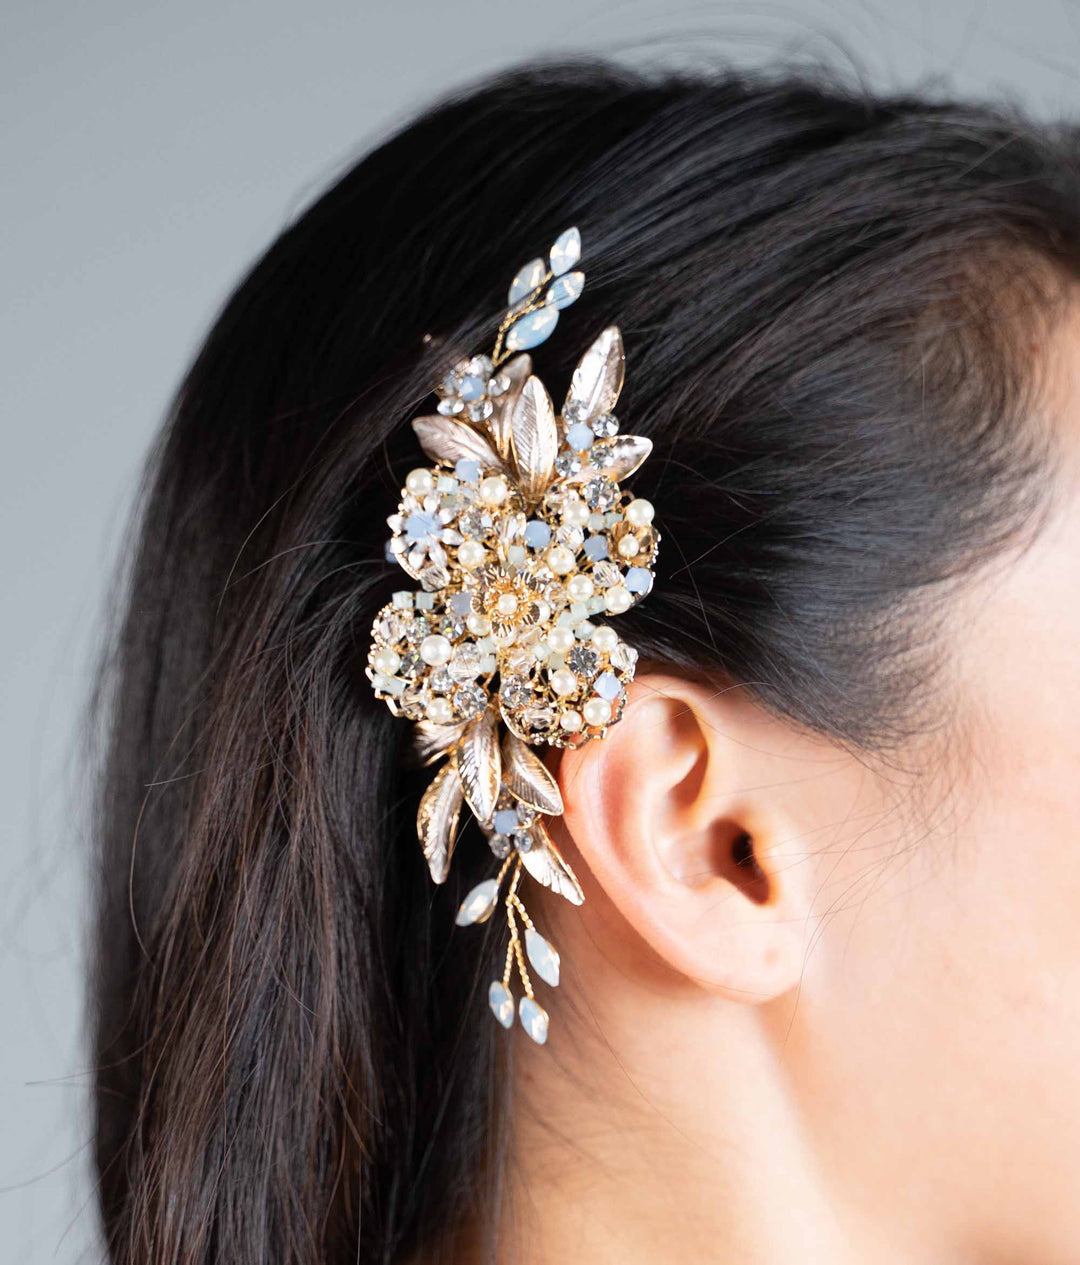 J Picone 'Nena' Gold and Opalescence Hair Clip